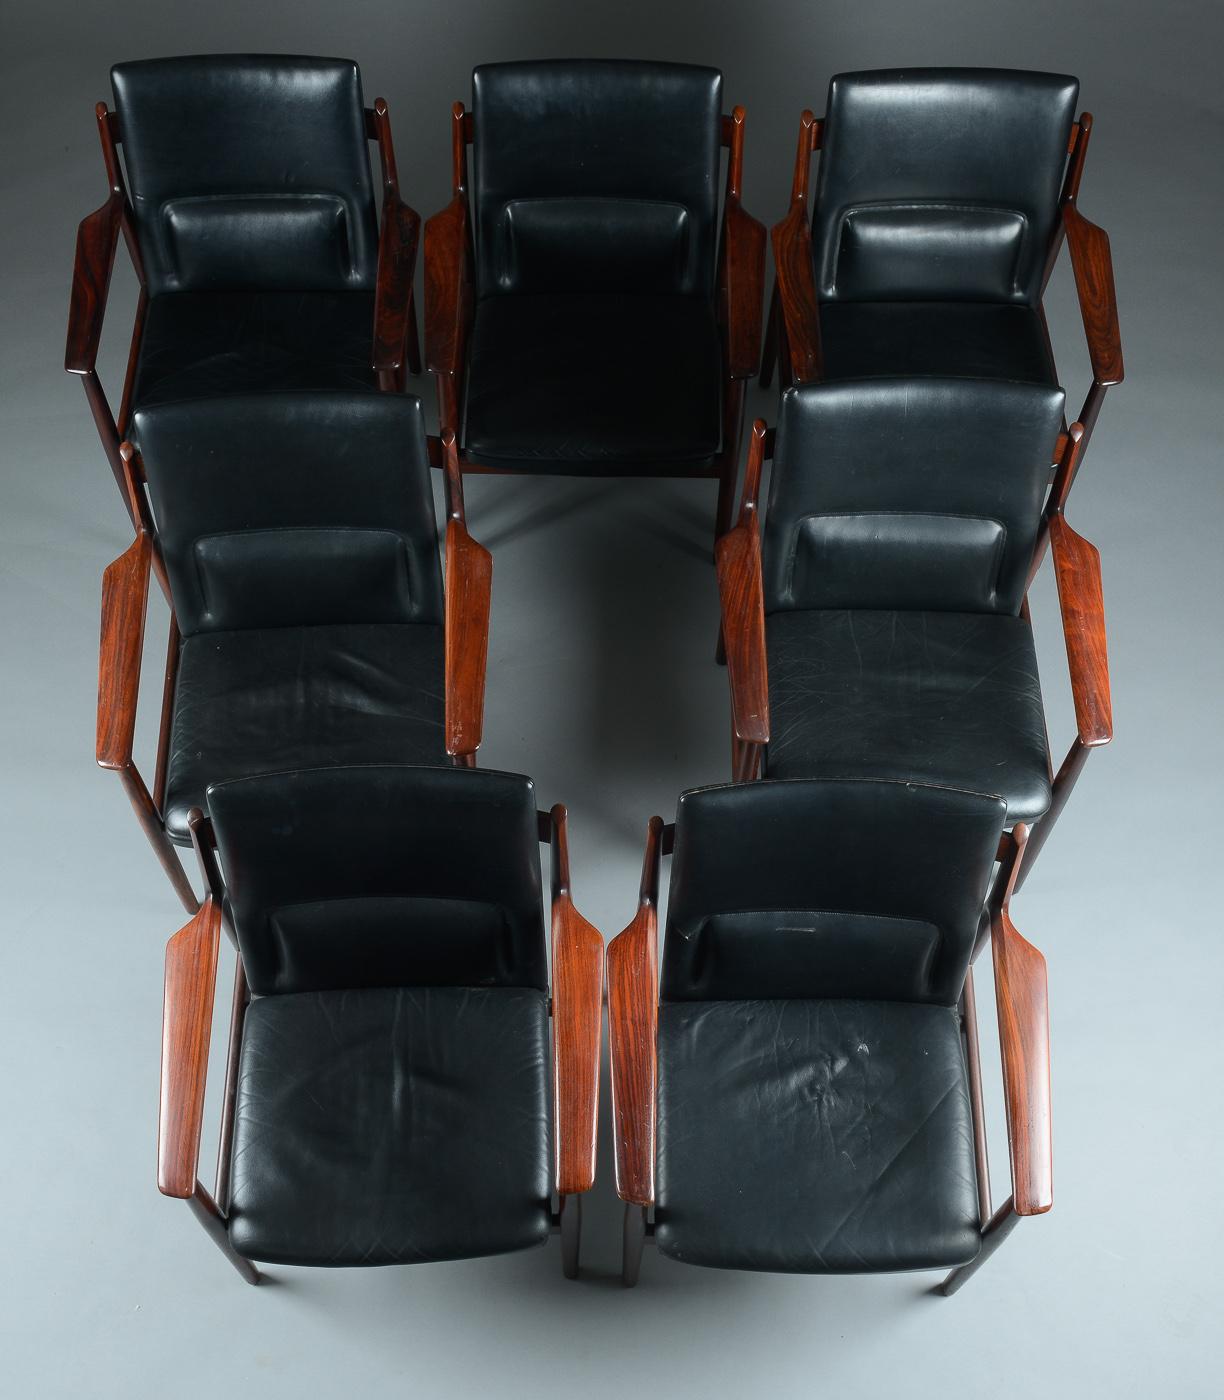 Pictured is a set of seven armchairs priced and sold inidividually designed by Arne Vodder and made in the 1960s by Sibast. Original black leather is in good condition showing minor marks from normal wear and tear. 

A second set of 4 of the same